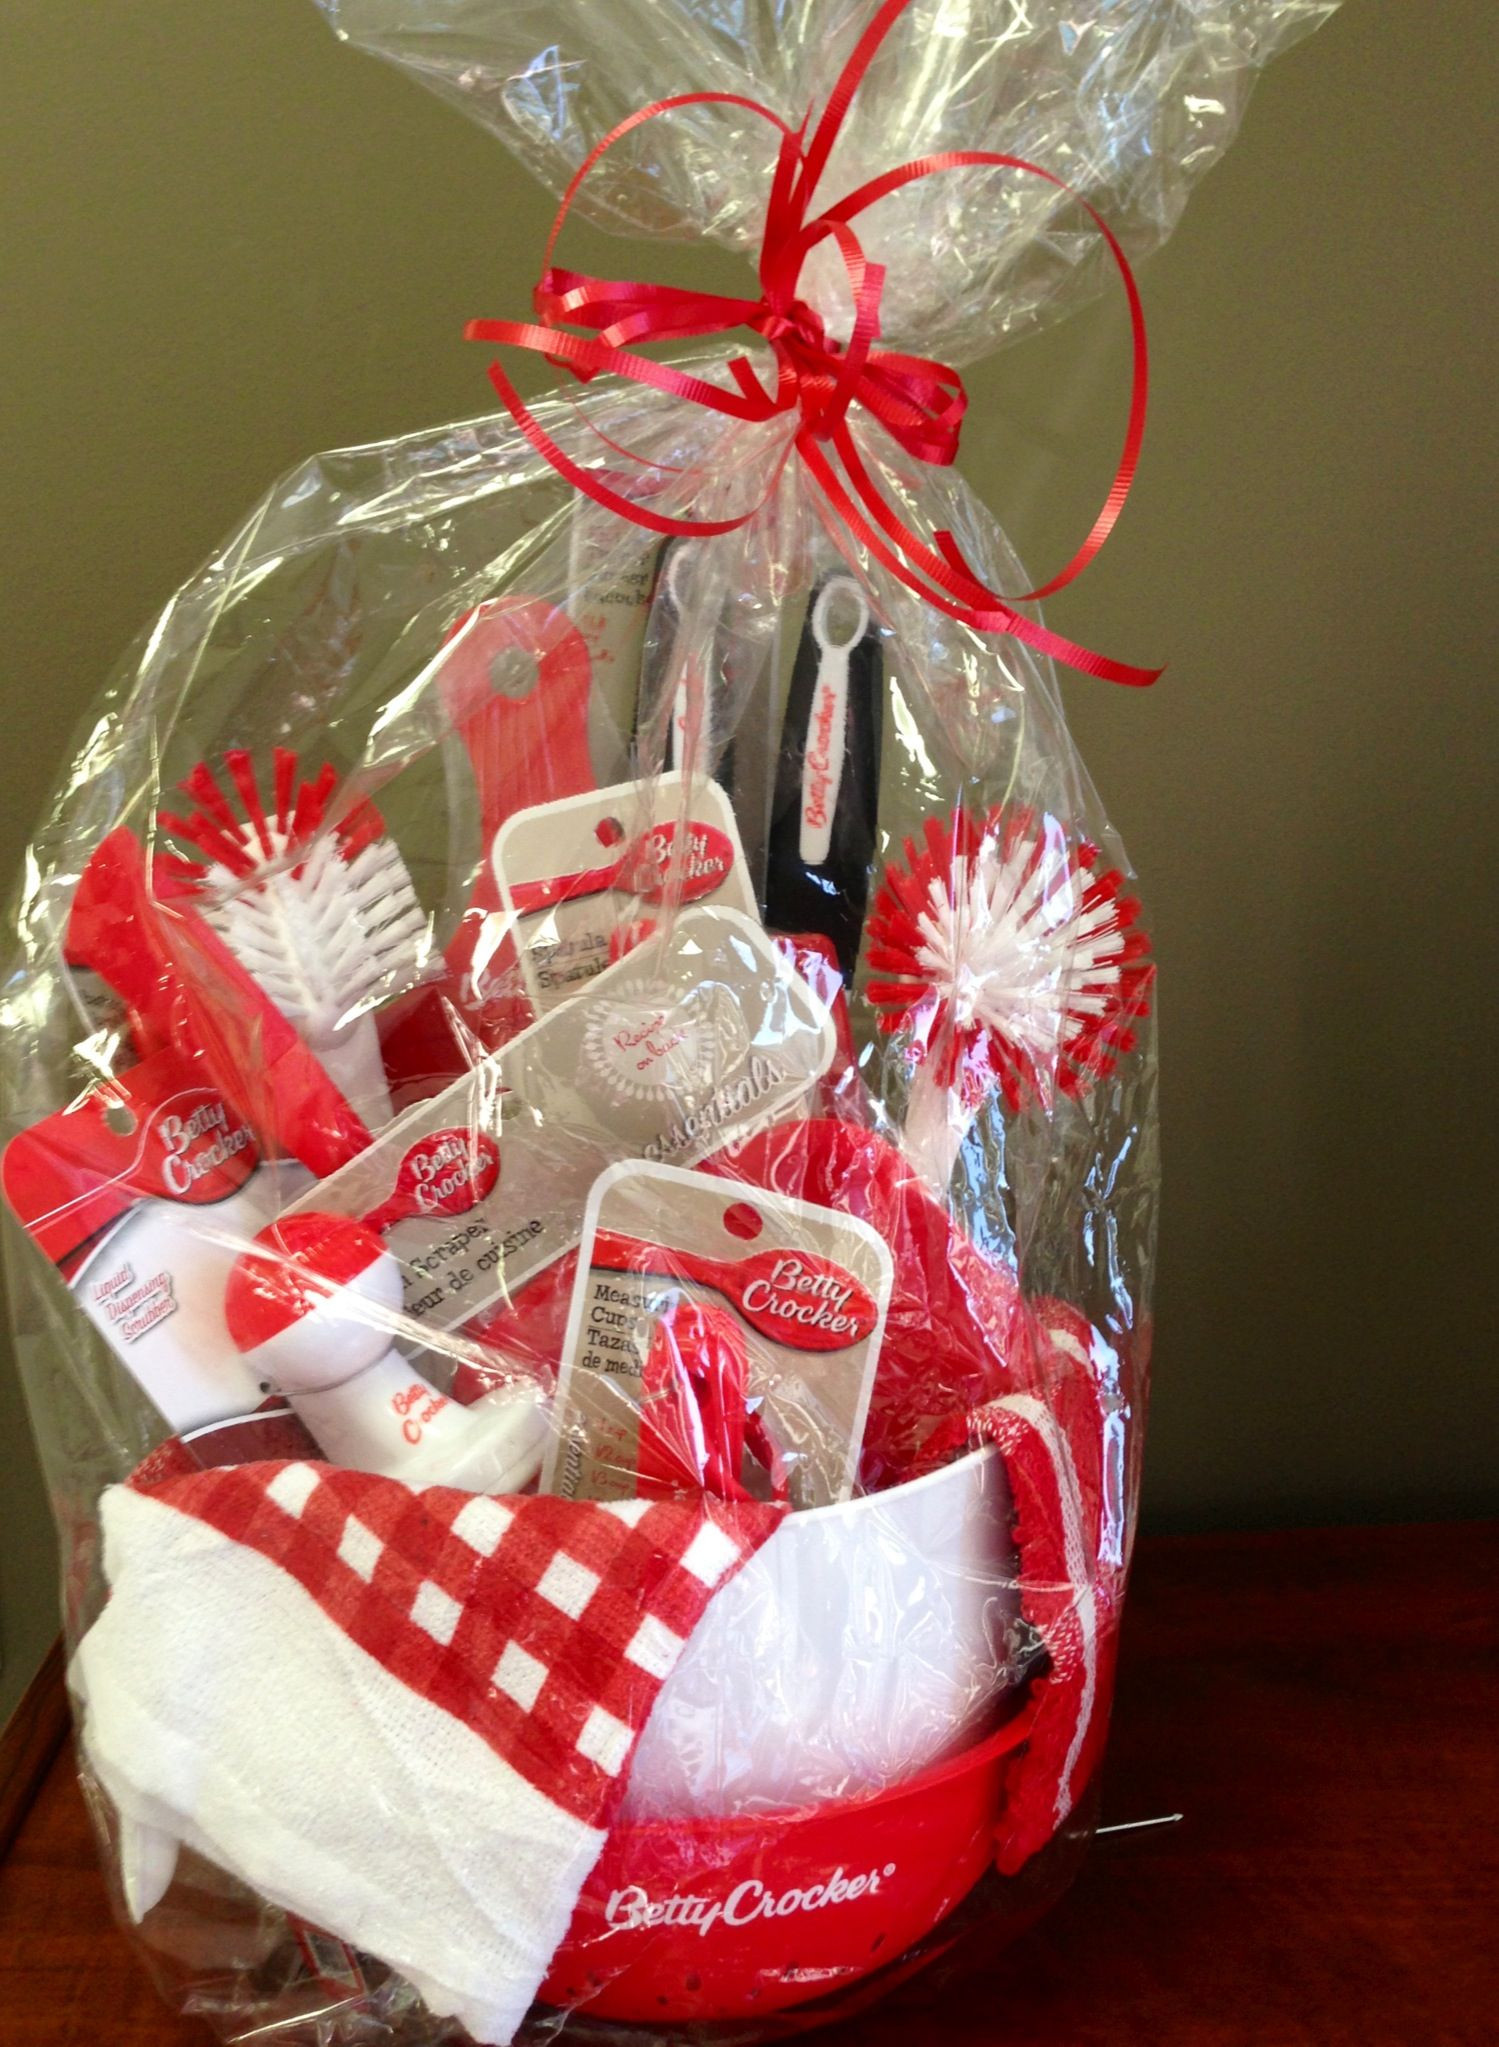 Kitchen Gift Basket Ideas Luxury Kitchen Gift Basket From The Dollar Tree Good For Showers Of Kitchen Gift Basket Ideas 